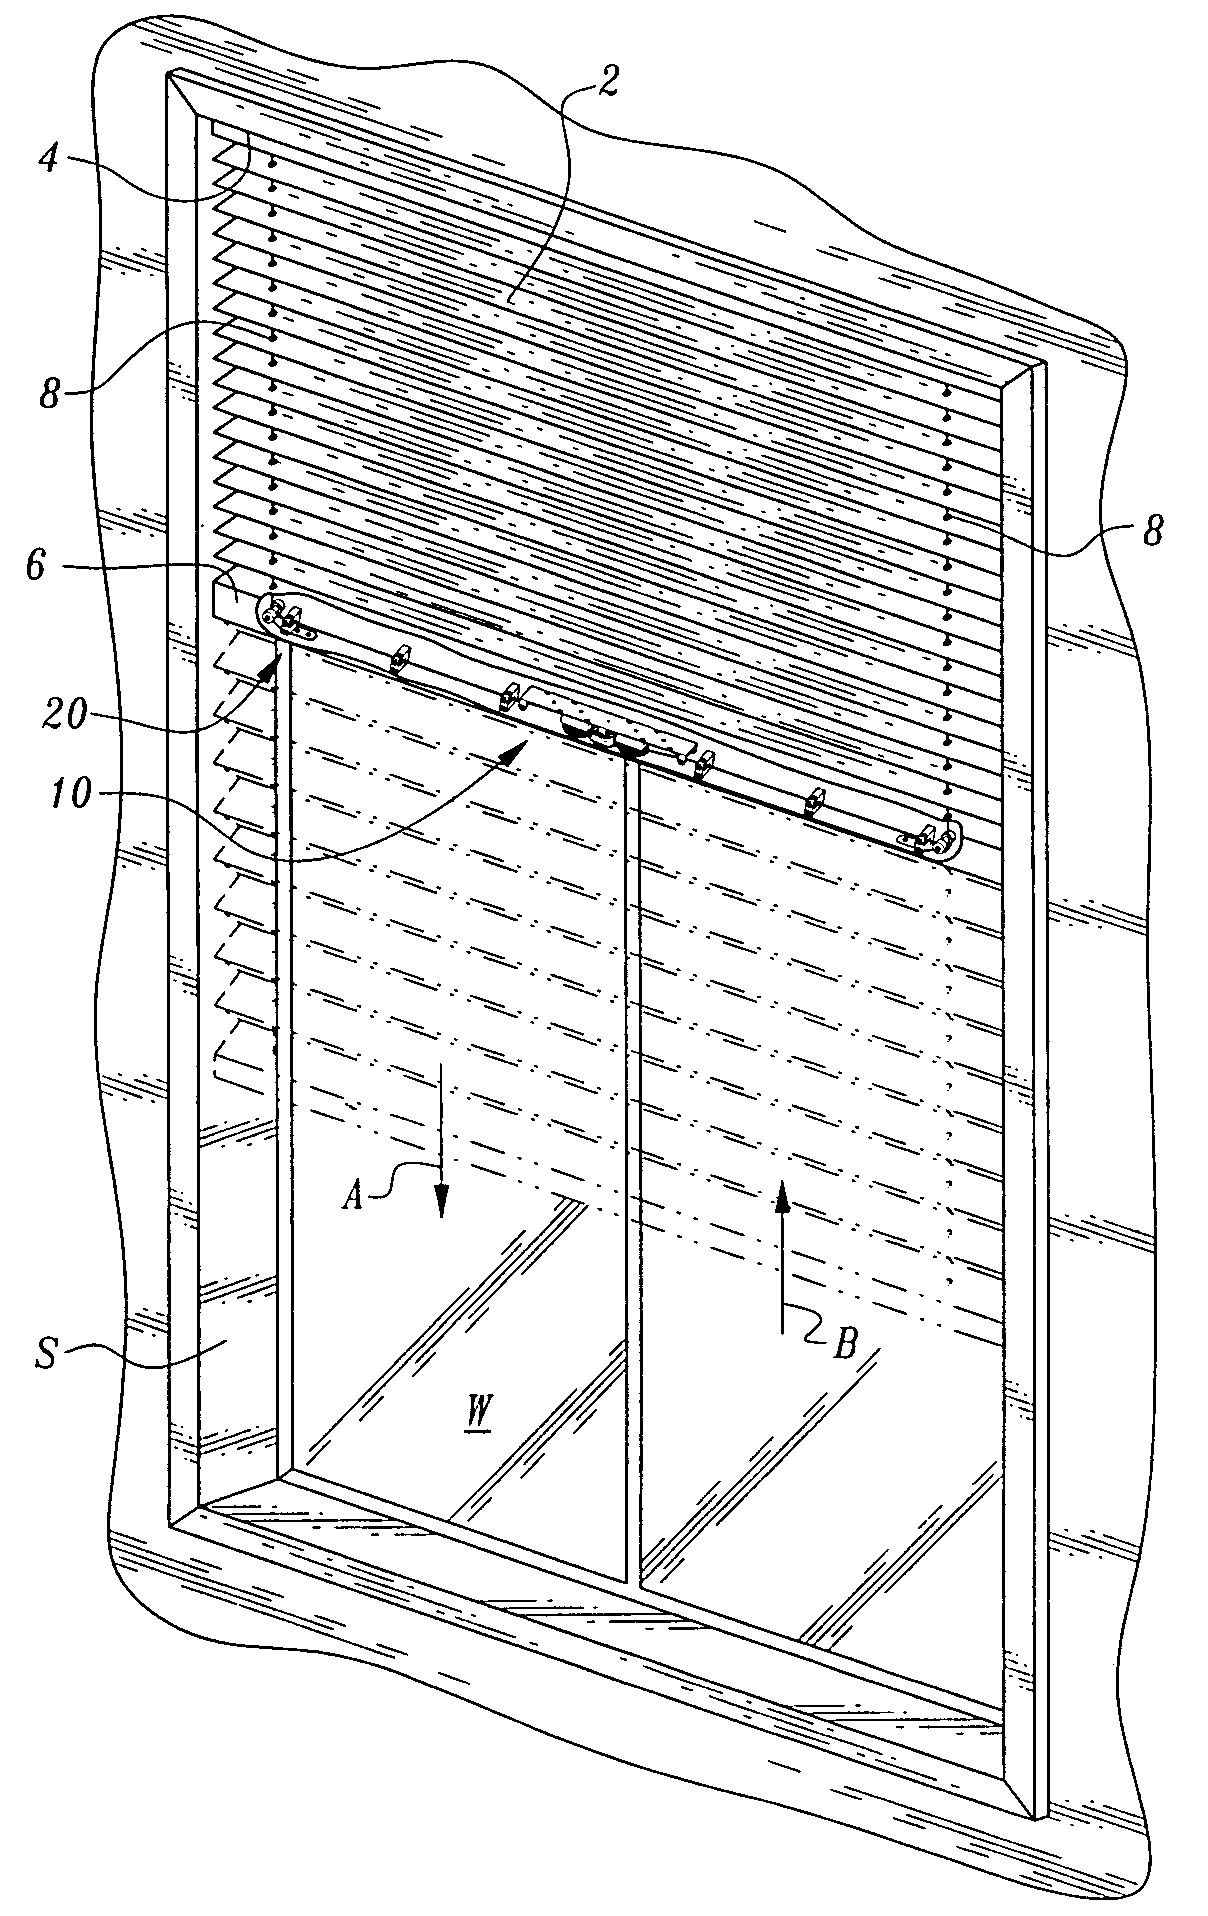 Progressive resistance lifting mechanism for a window covering